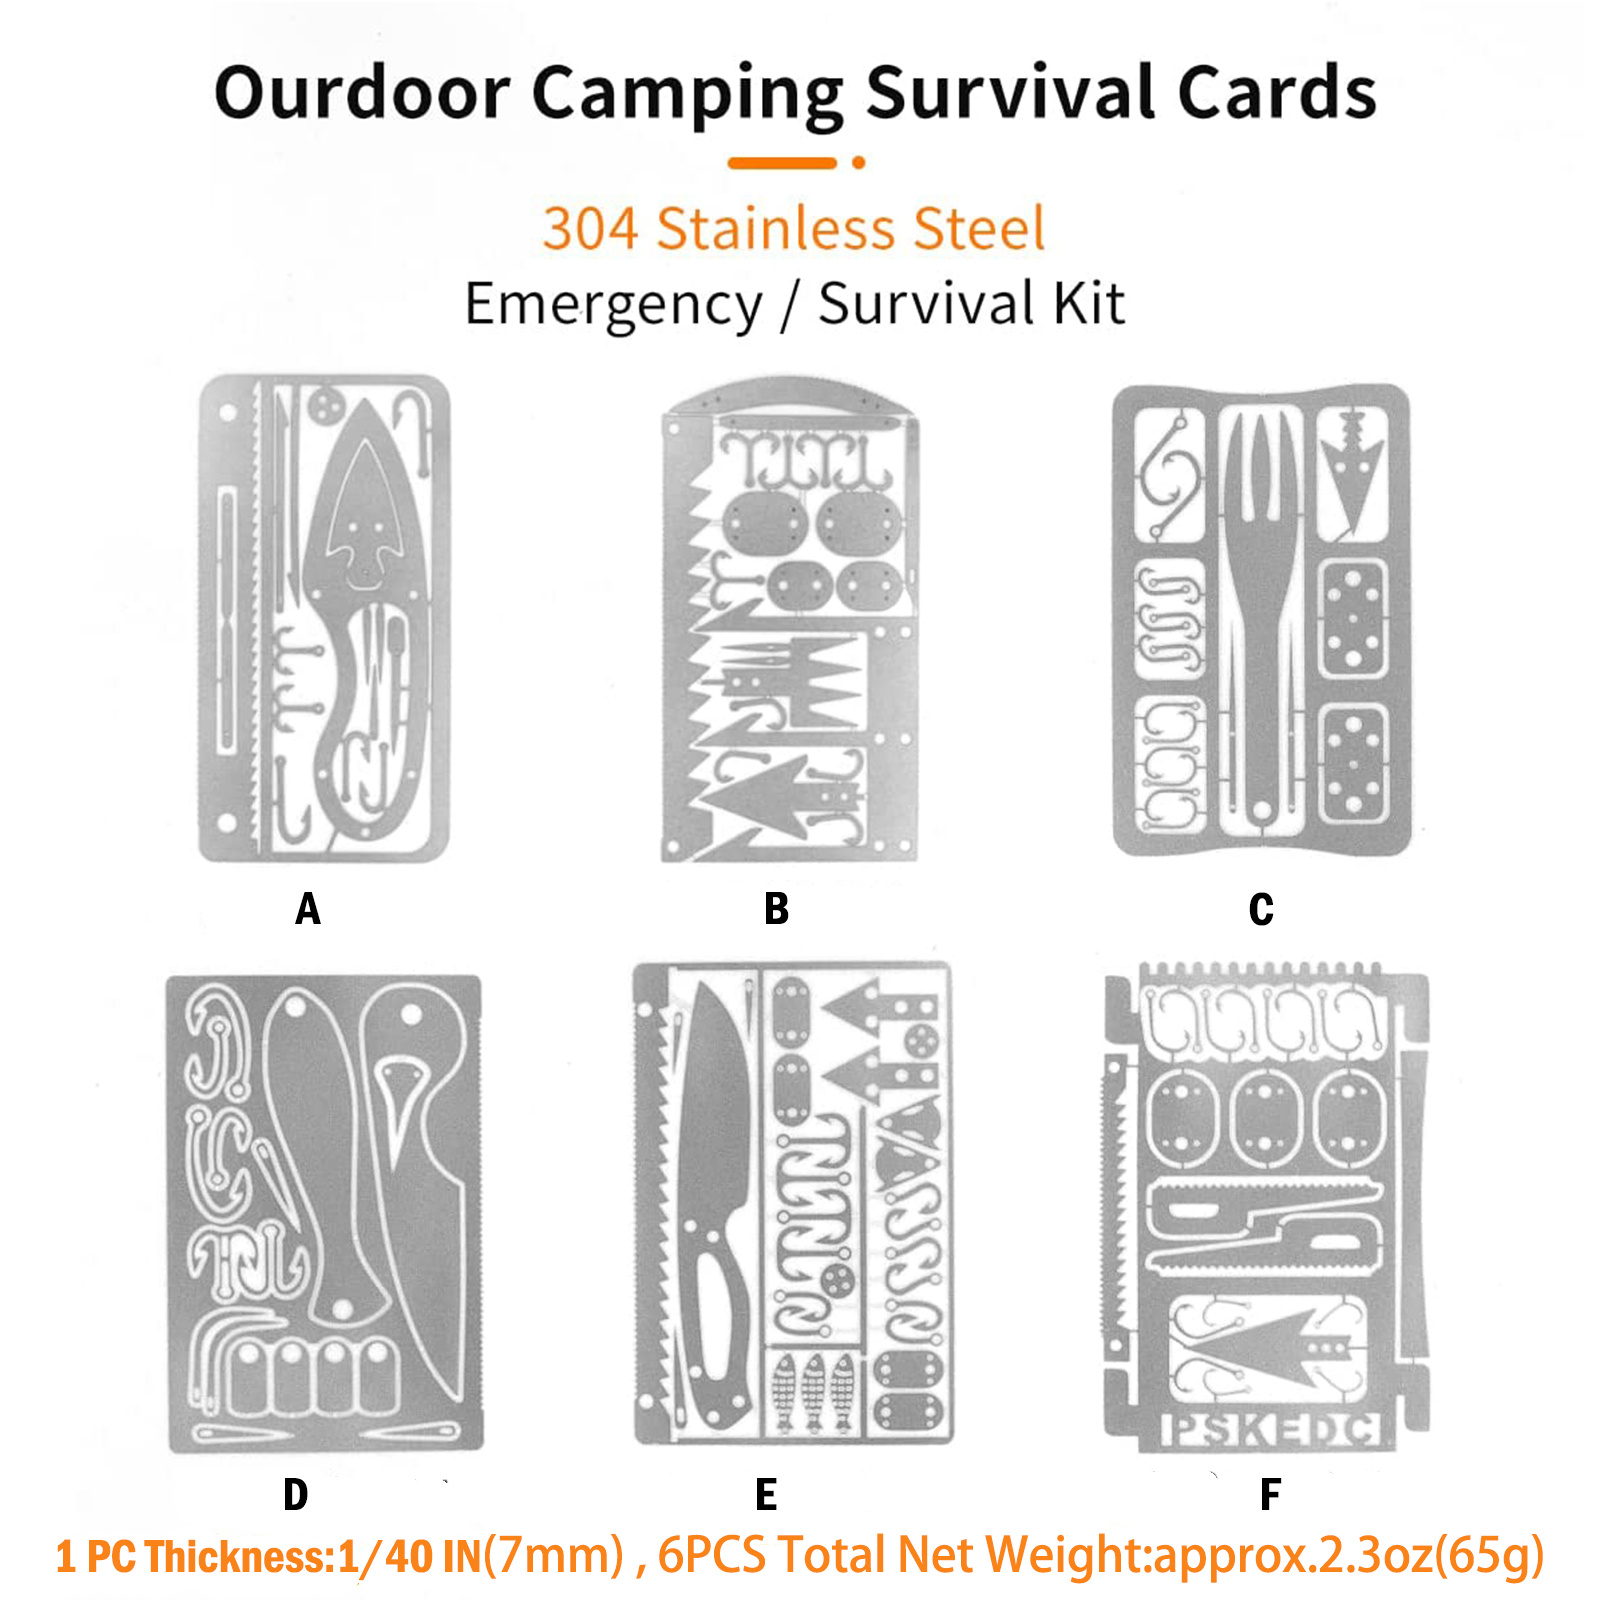 Moricher Survival Card Multitool Camping Gear with Fishing Line  Multipurpose EDC Kit for Fishing Outdoor Hiking Hunting Gift Idea